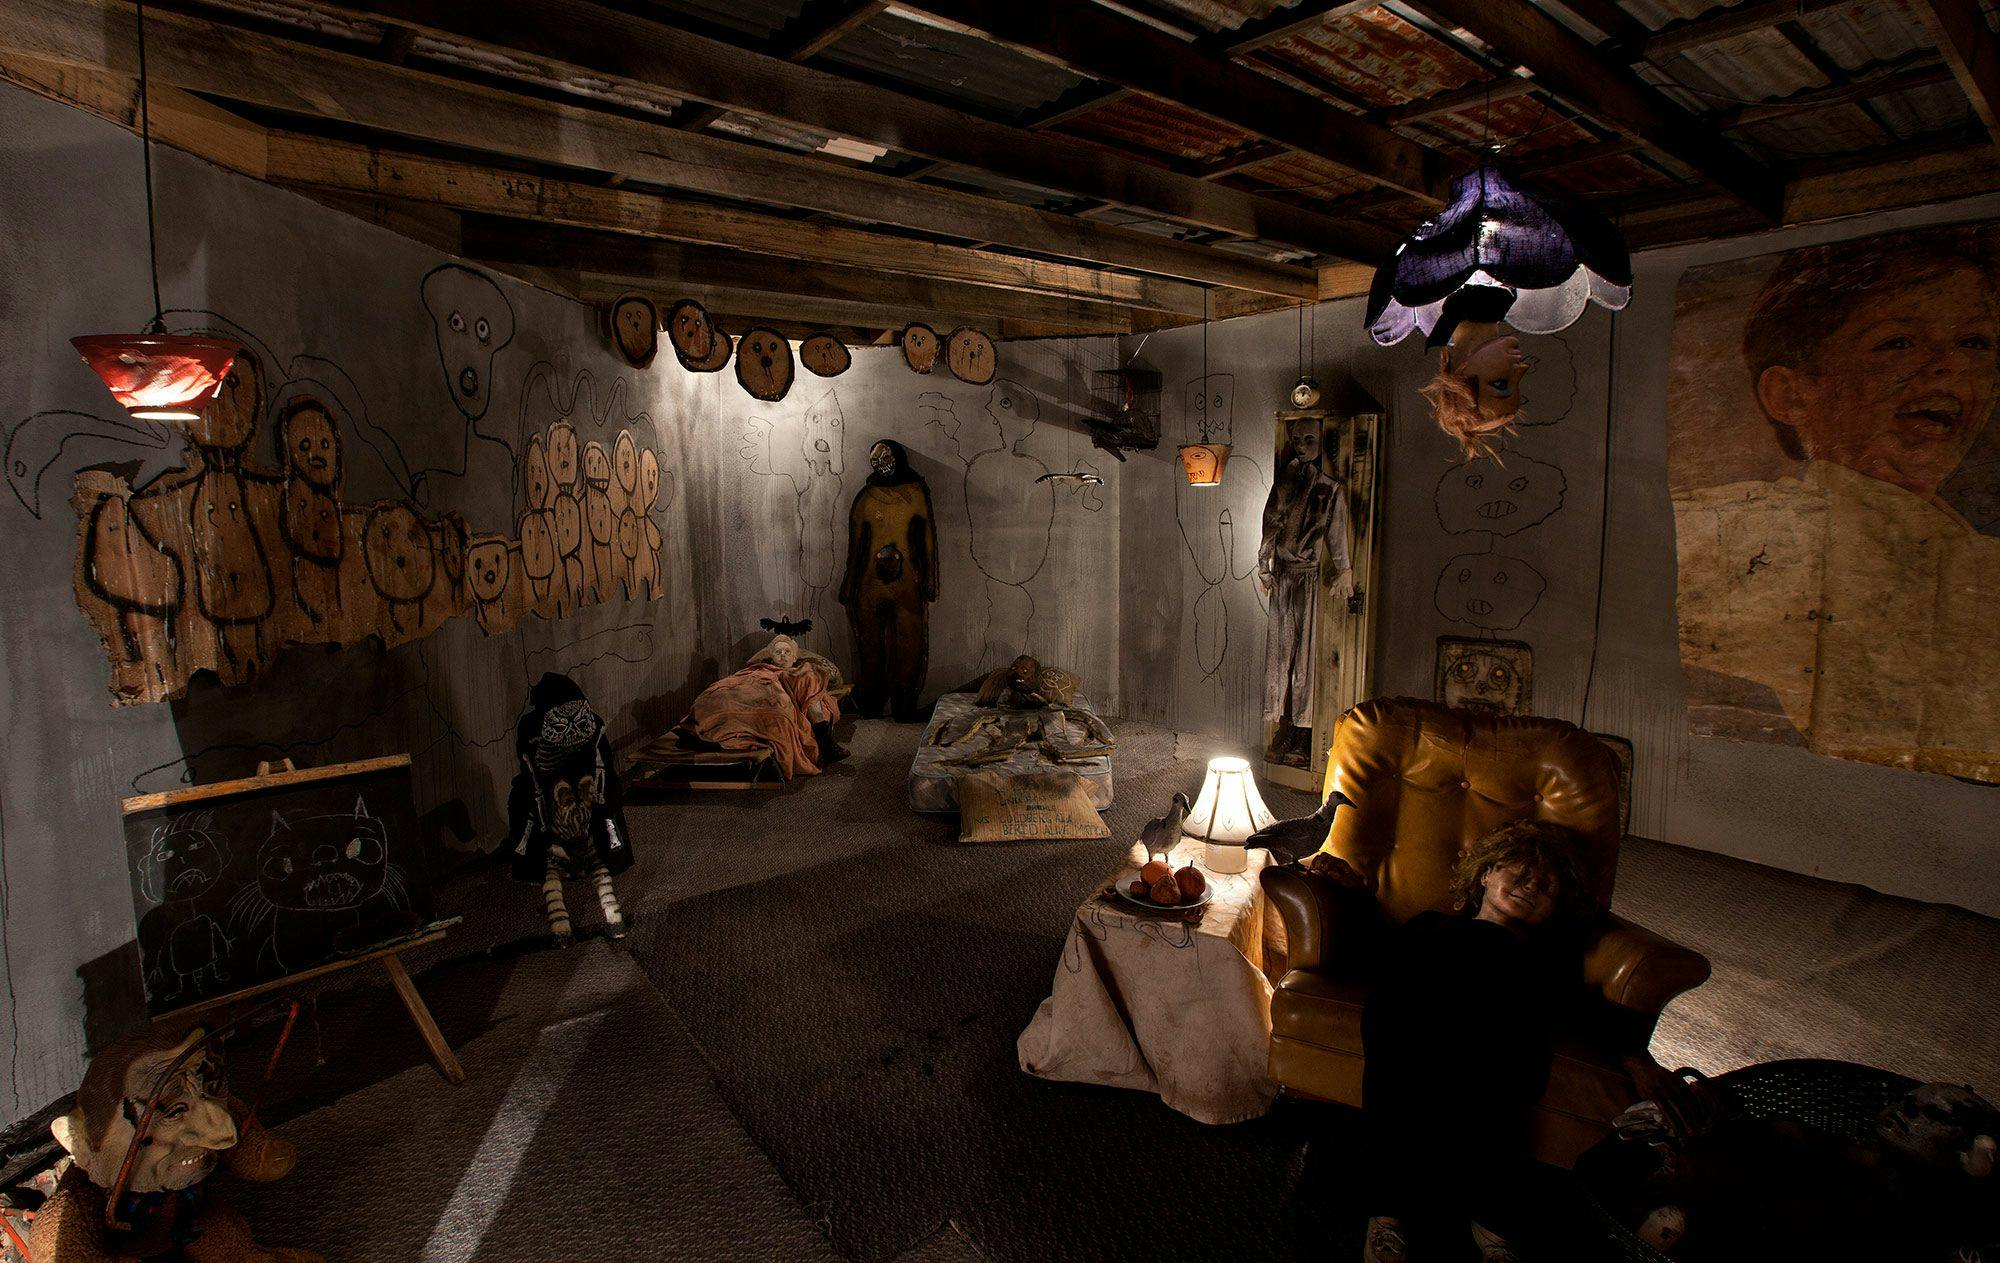 A dark grimy room filled with sculptures and drawings.